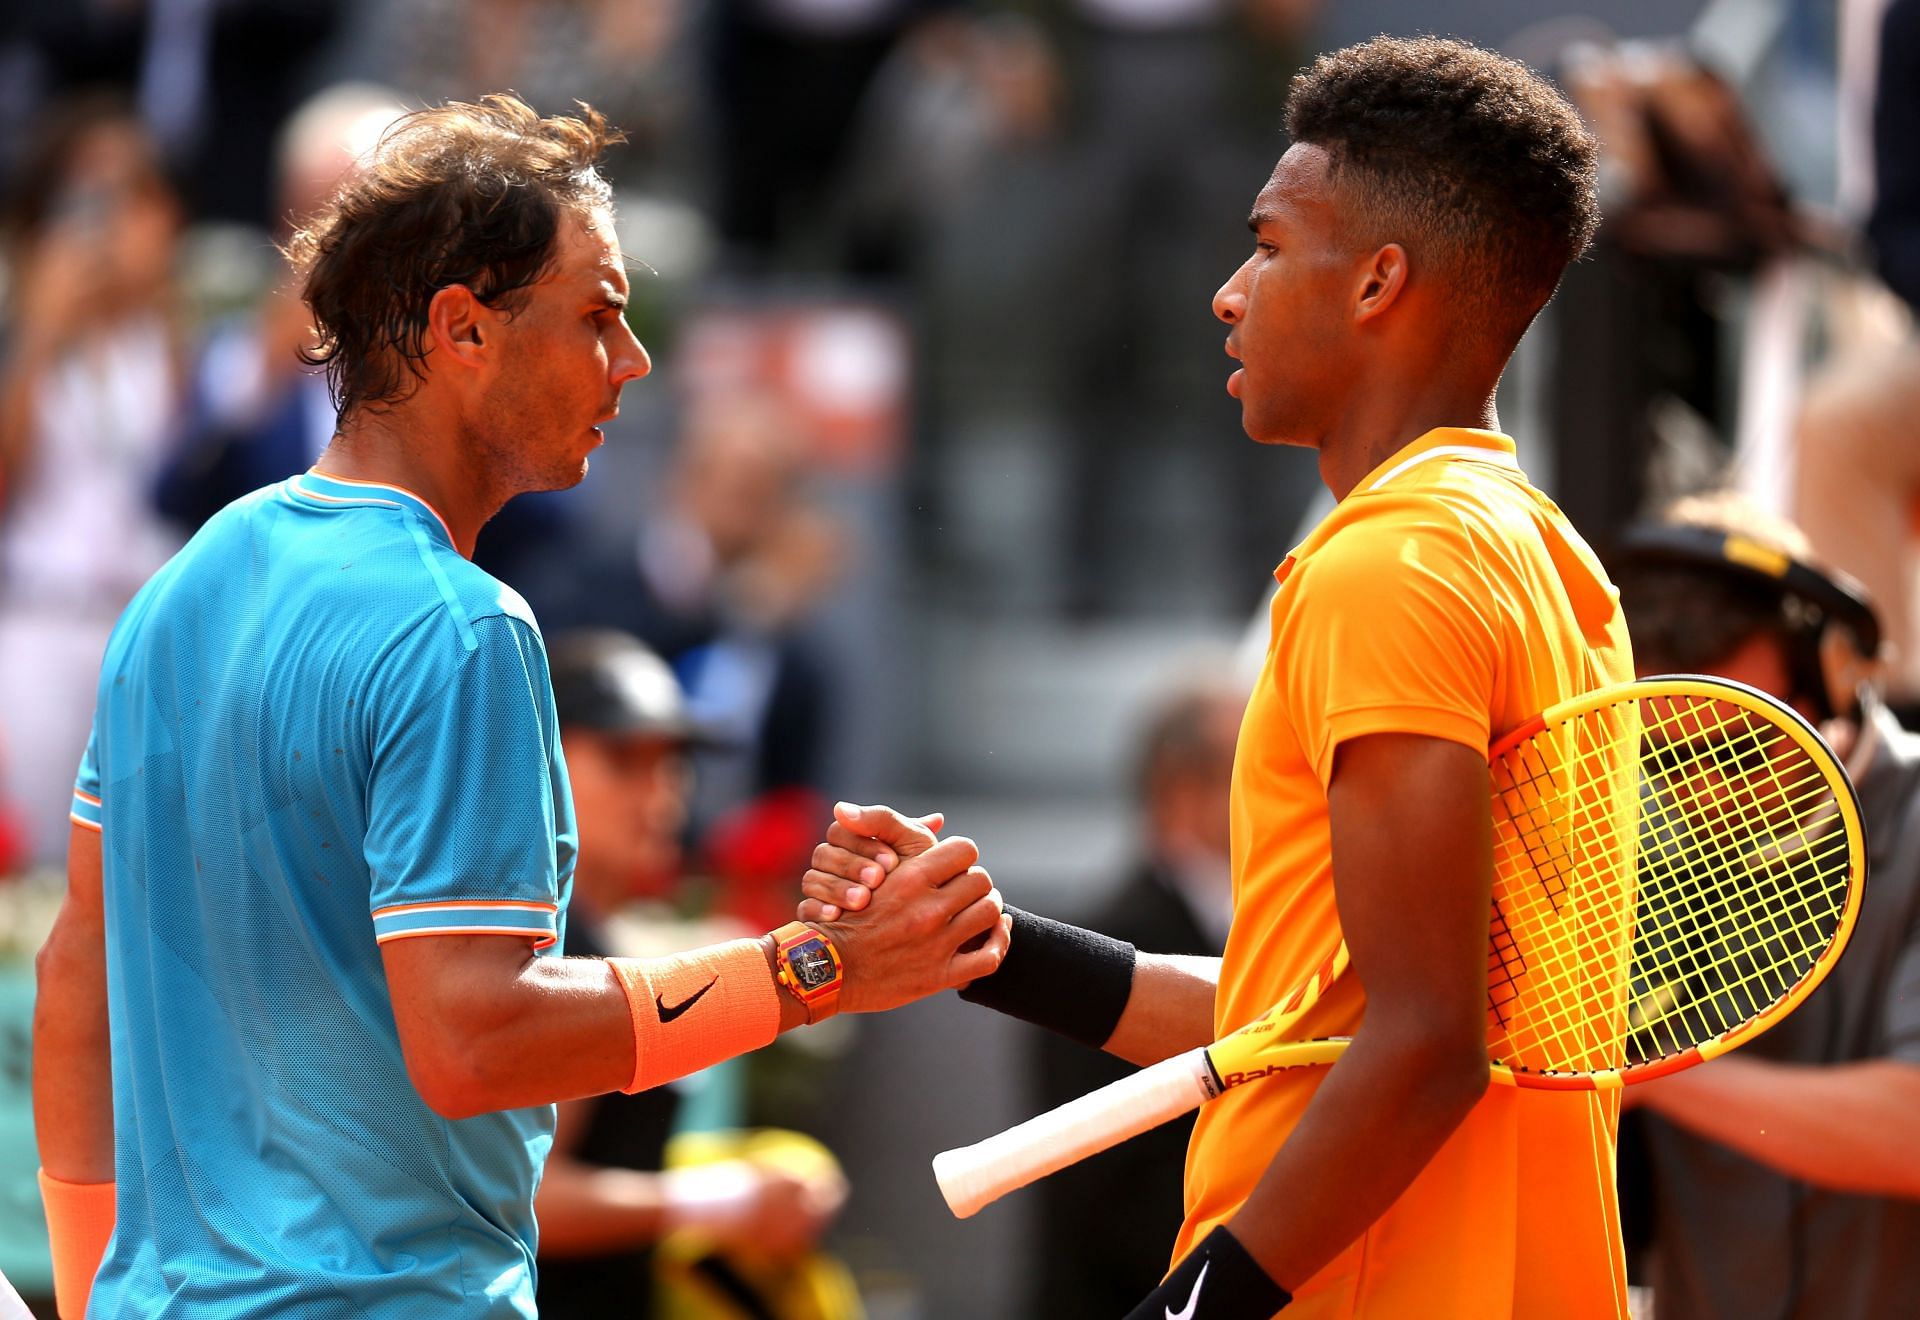 Rafael Nadal and Felix Auger-Aliassime have to deal with two different emotions this week